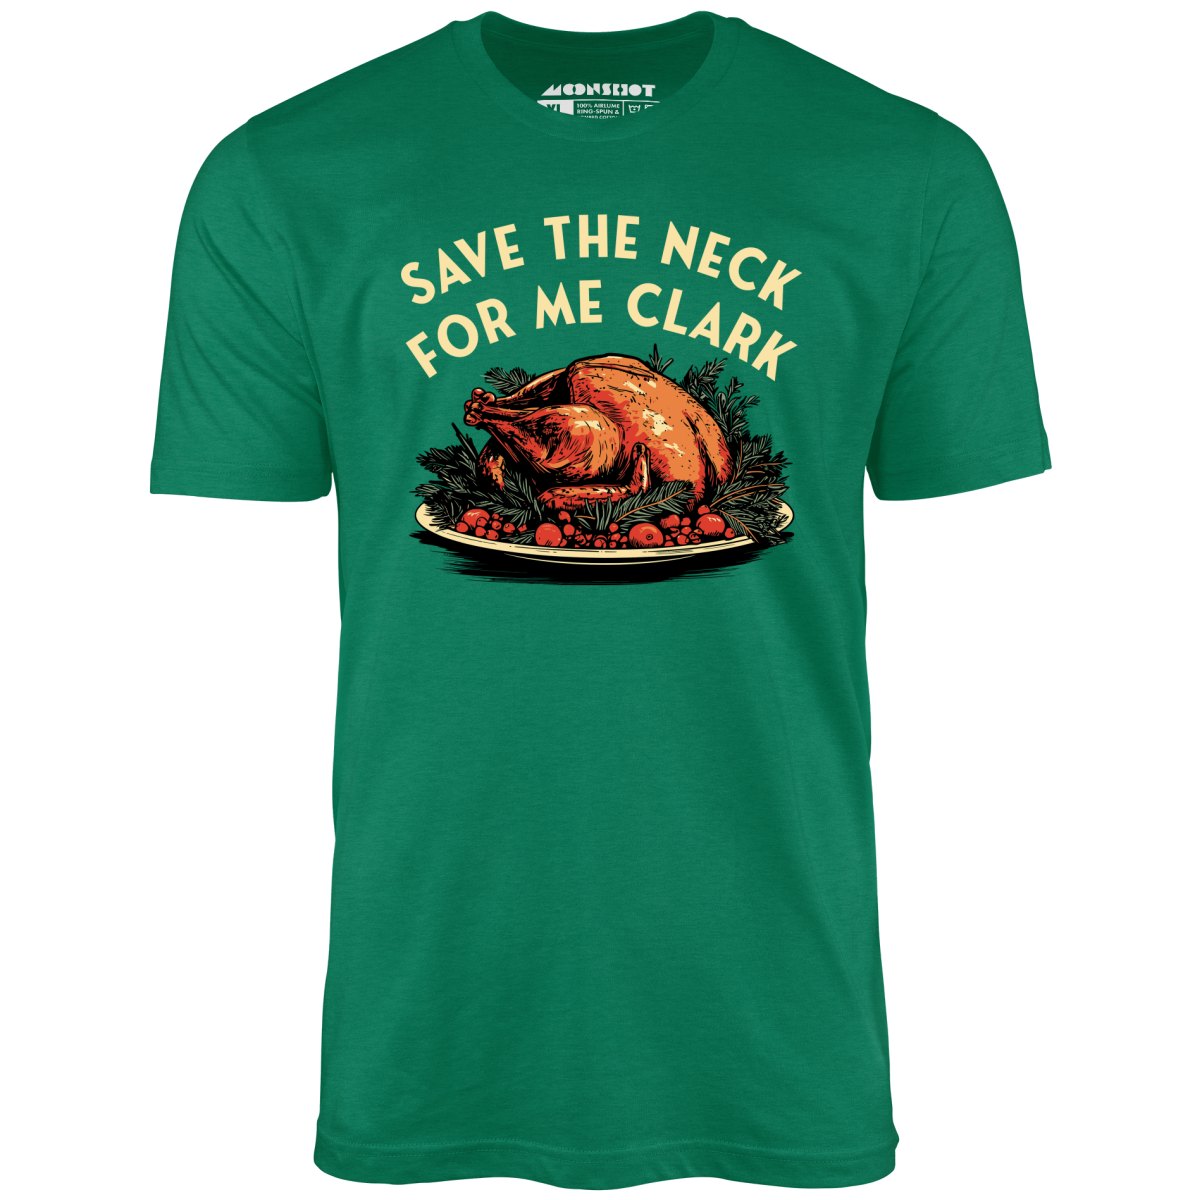 Save the Neck For Me Clark - Unisex T-Shirt